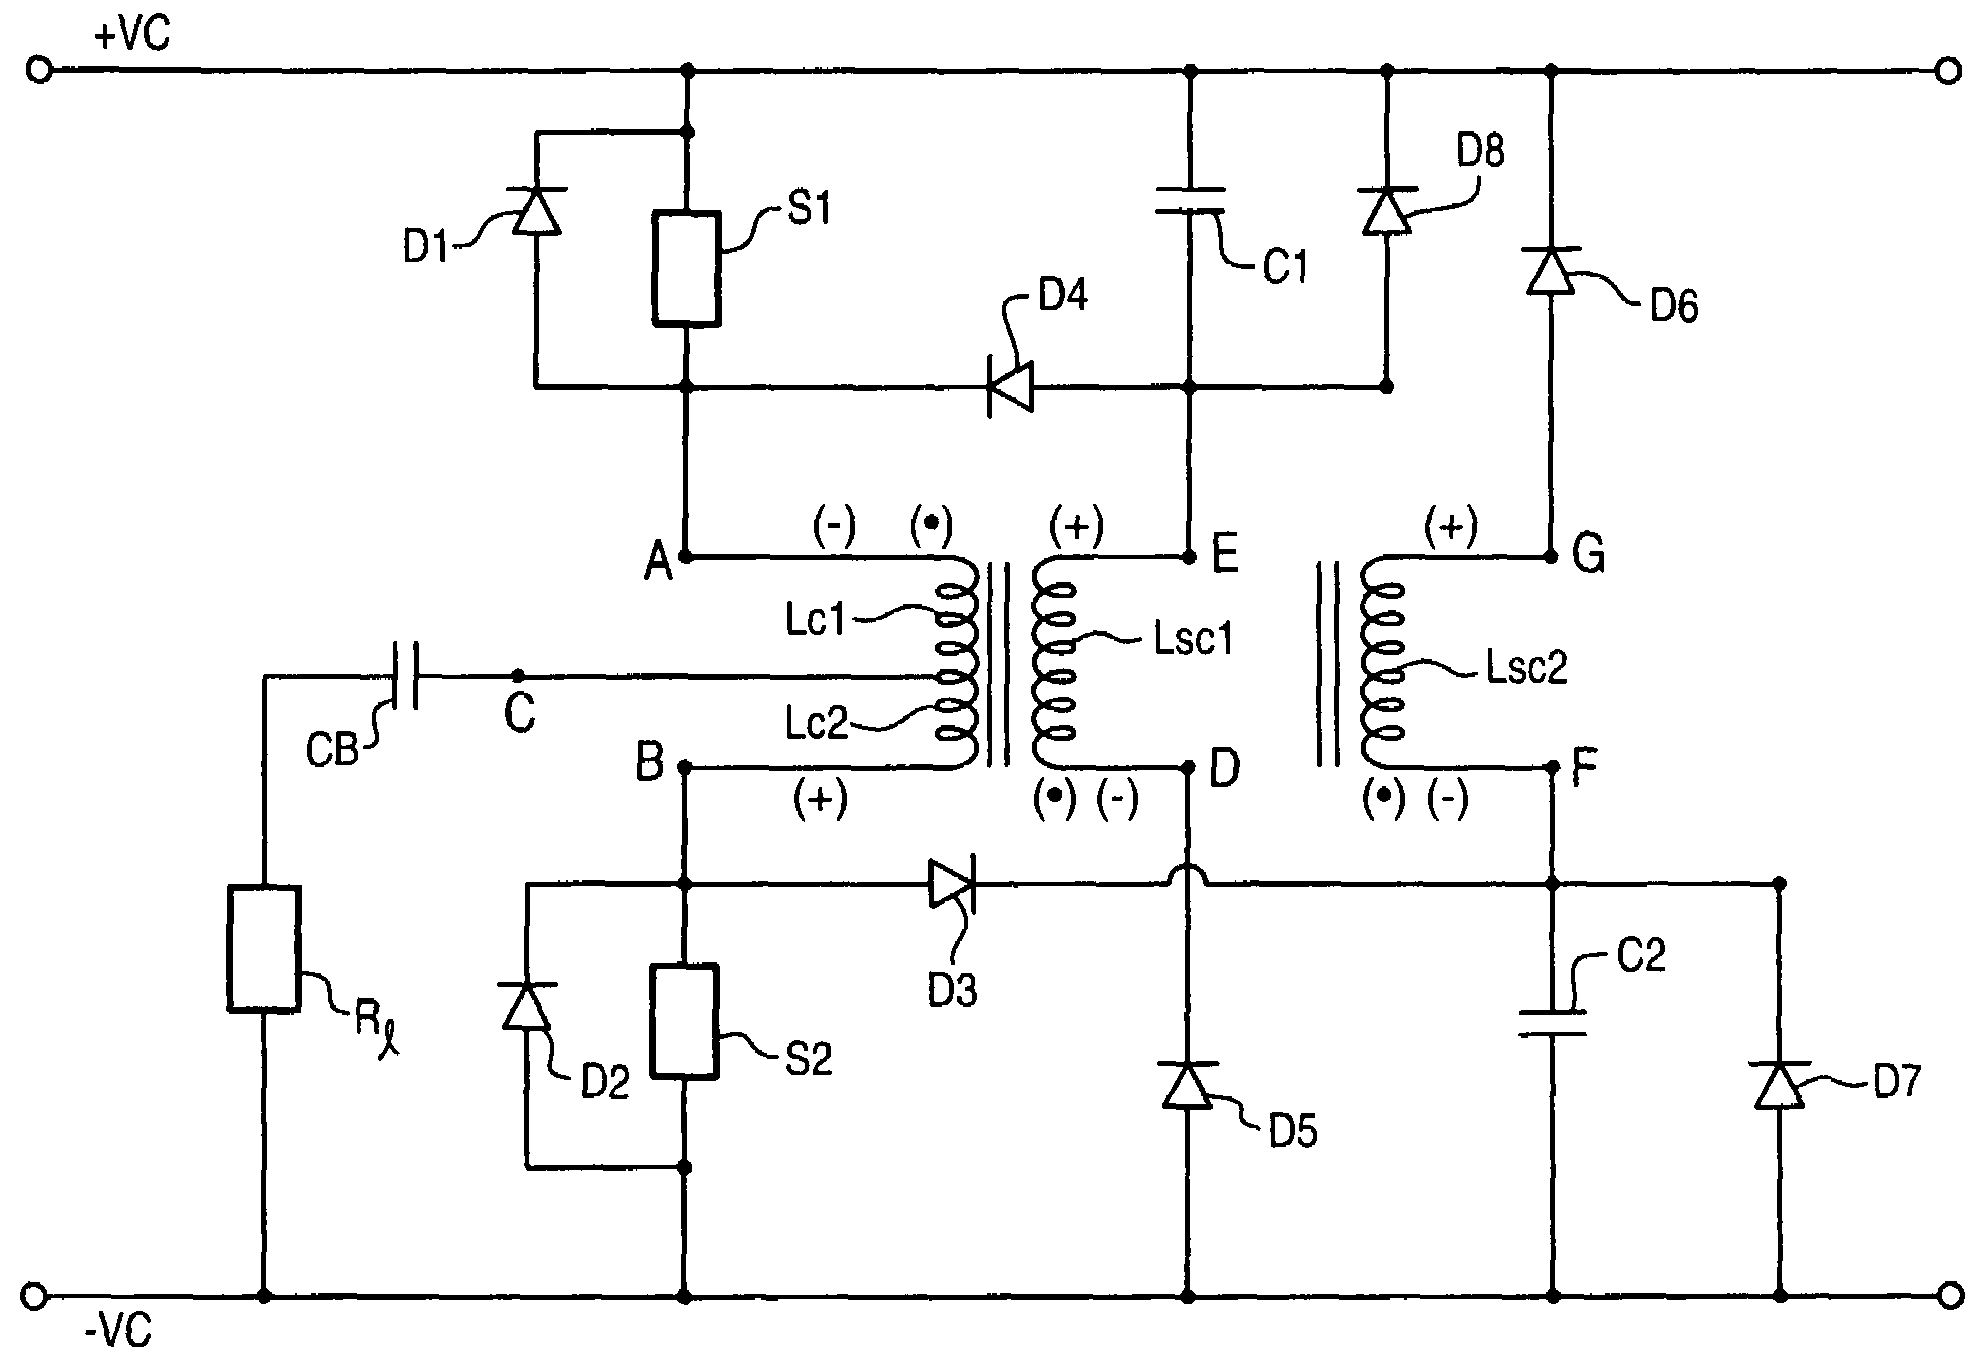 Switch mode power converter having multiple inductor windings equipped with snubber circuits